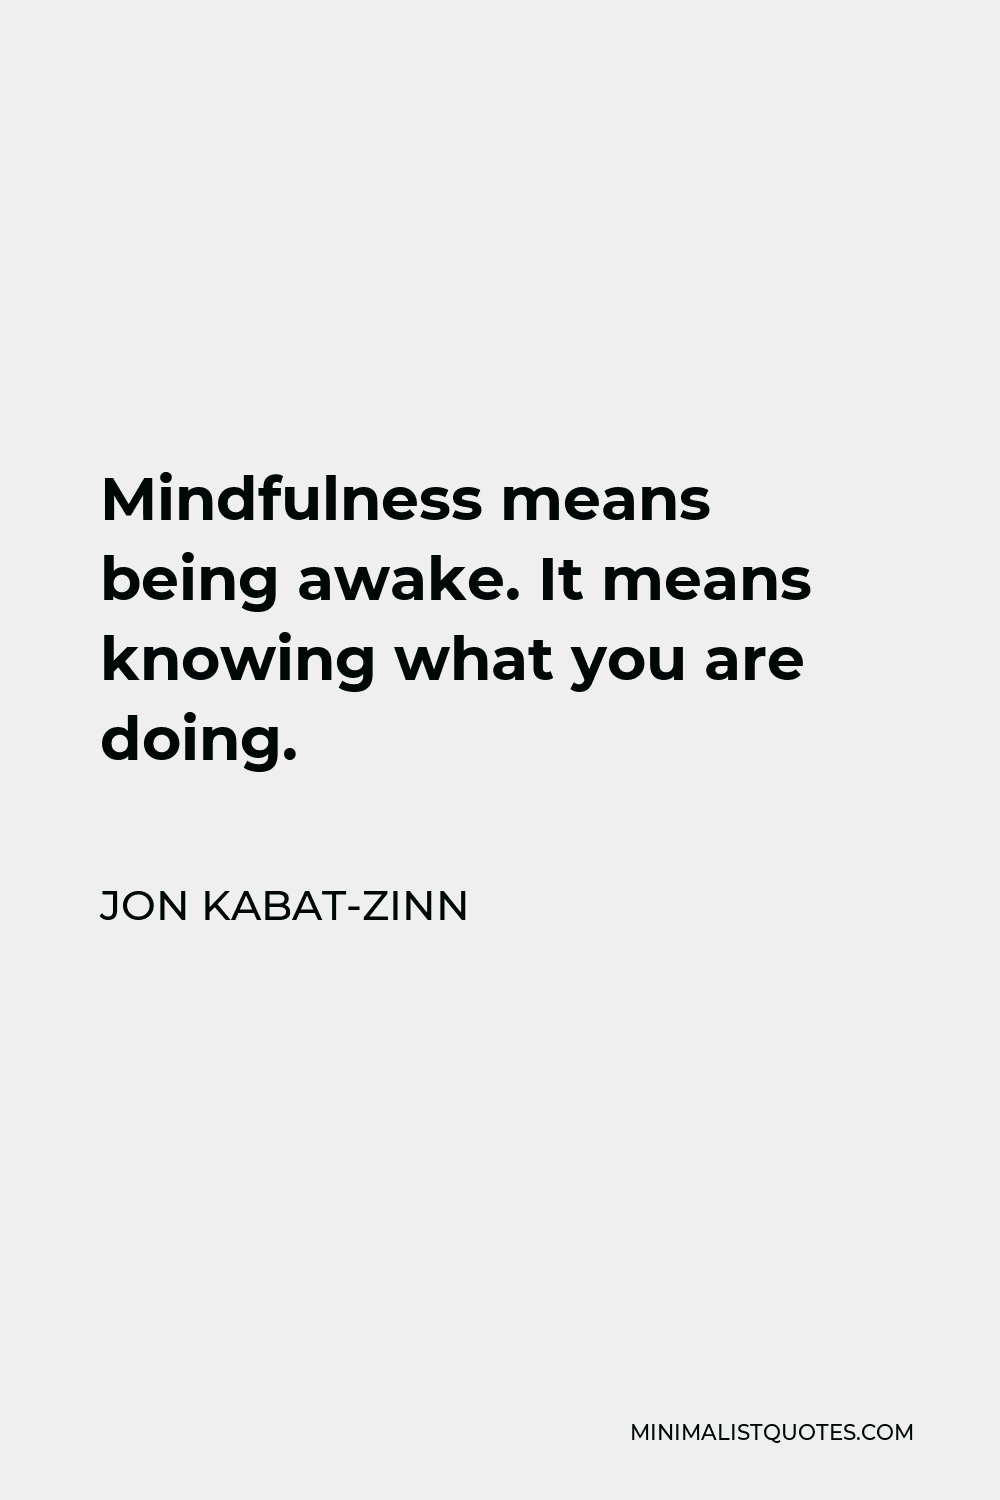 Jon Kabat-Zinn Quote - Mindfulness means being awake. It means knowing what you are doing.